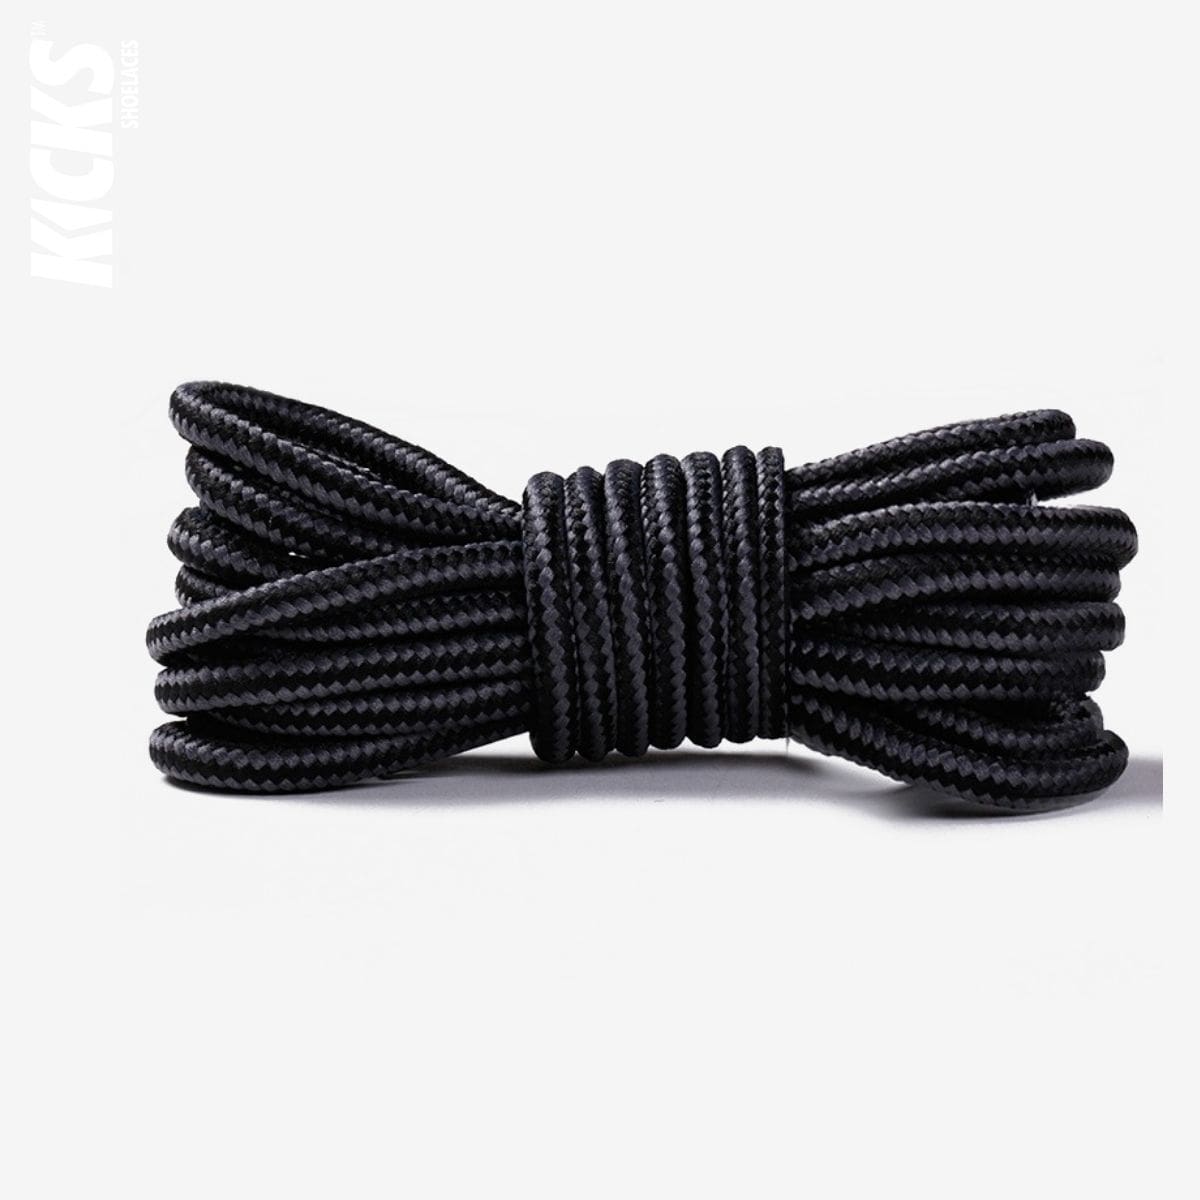 striped-two-color-shoelaces-for-casual-shoes-in-dark-grey-and-black